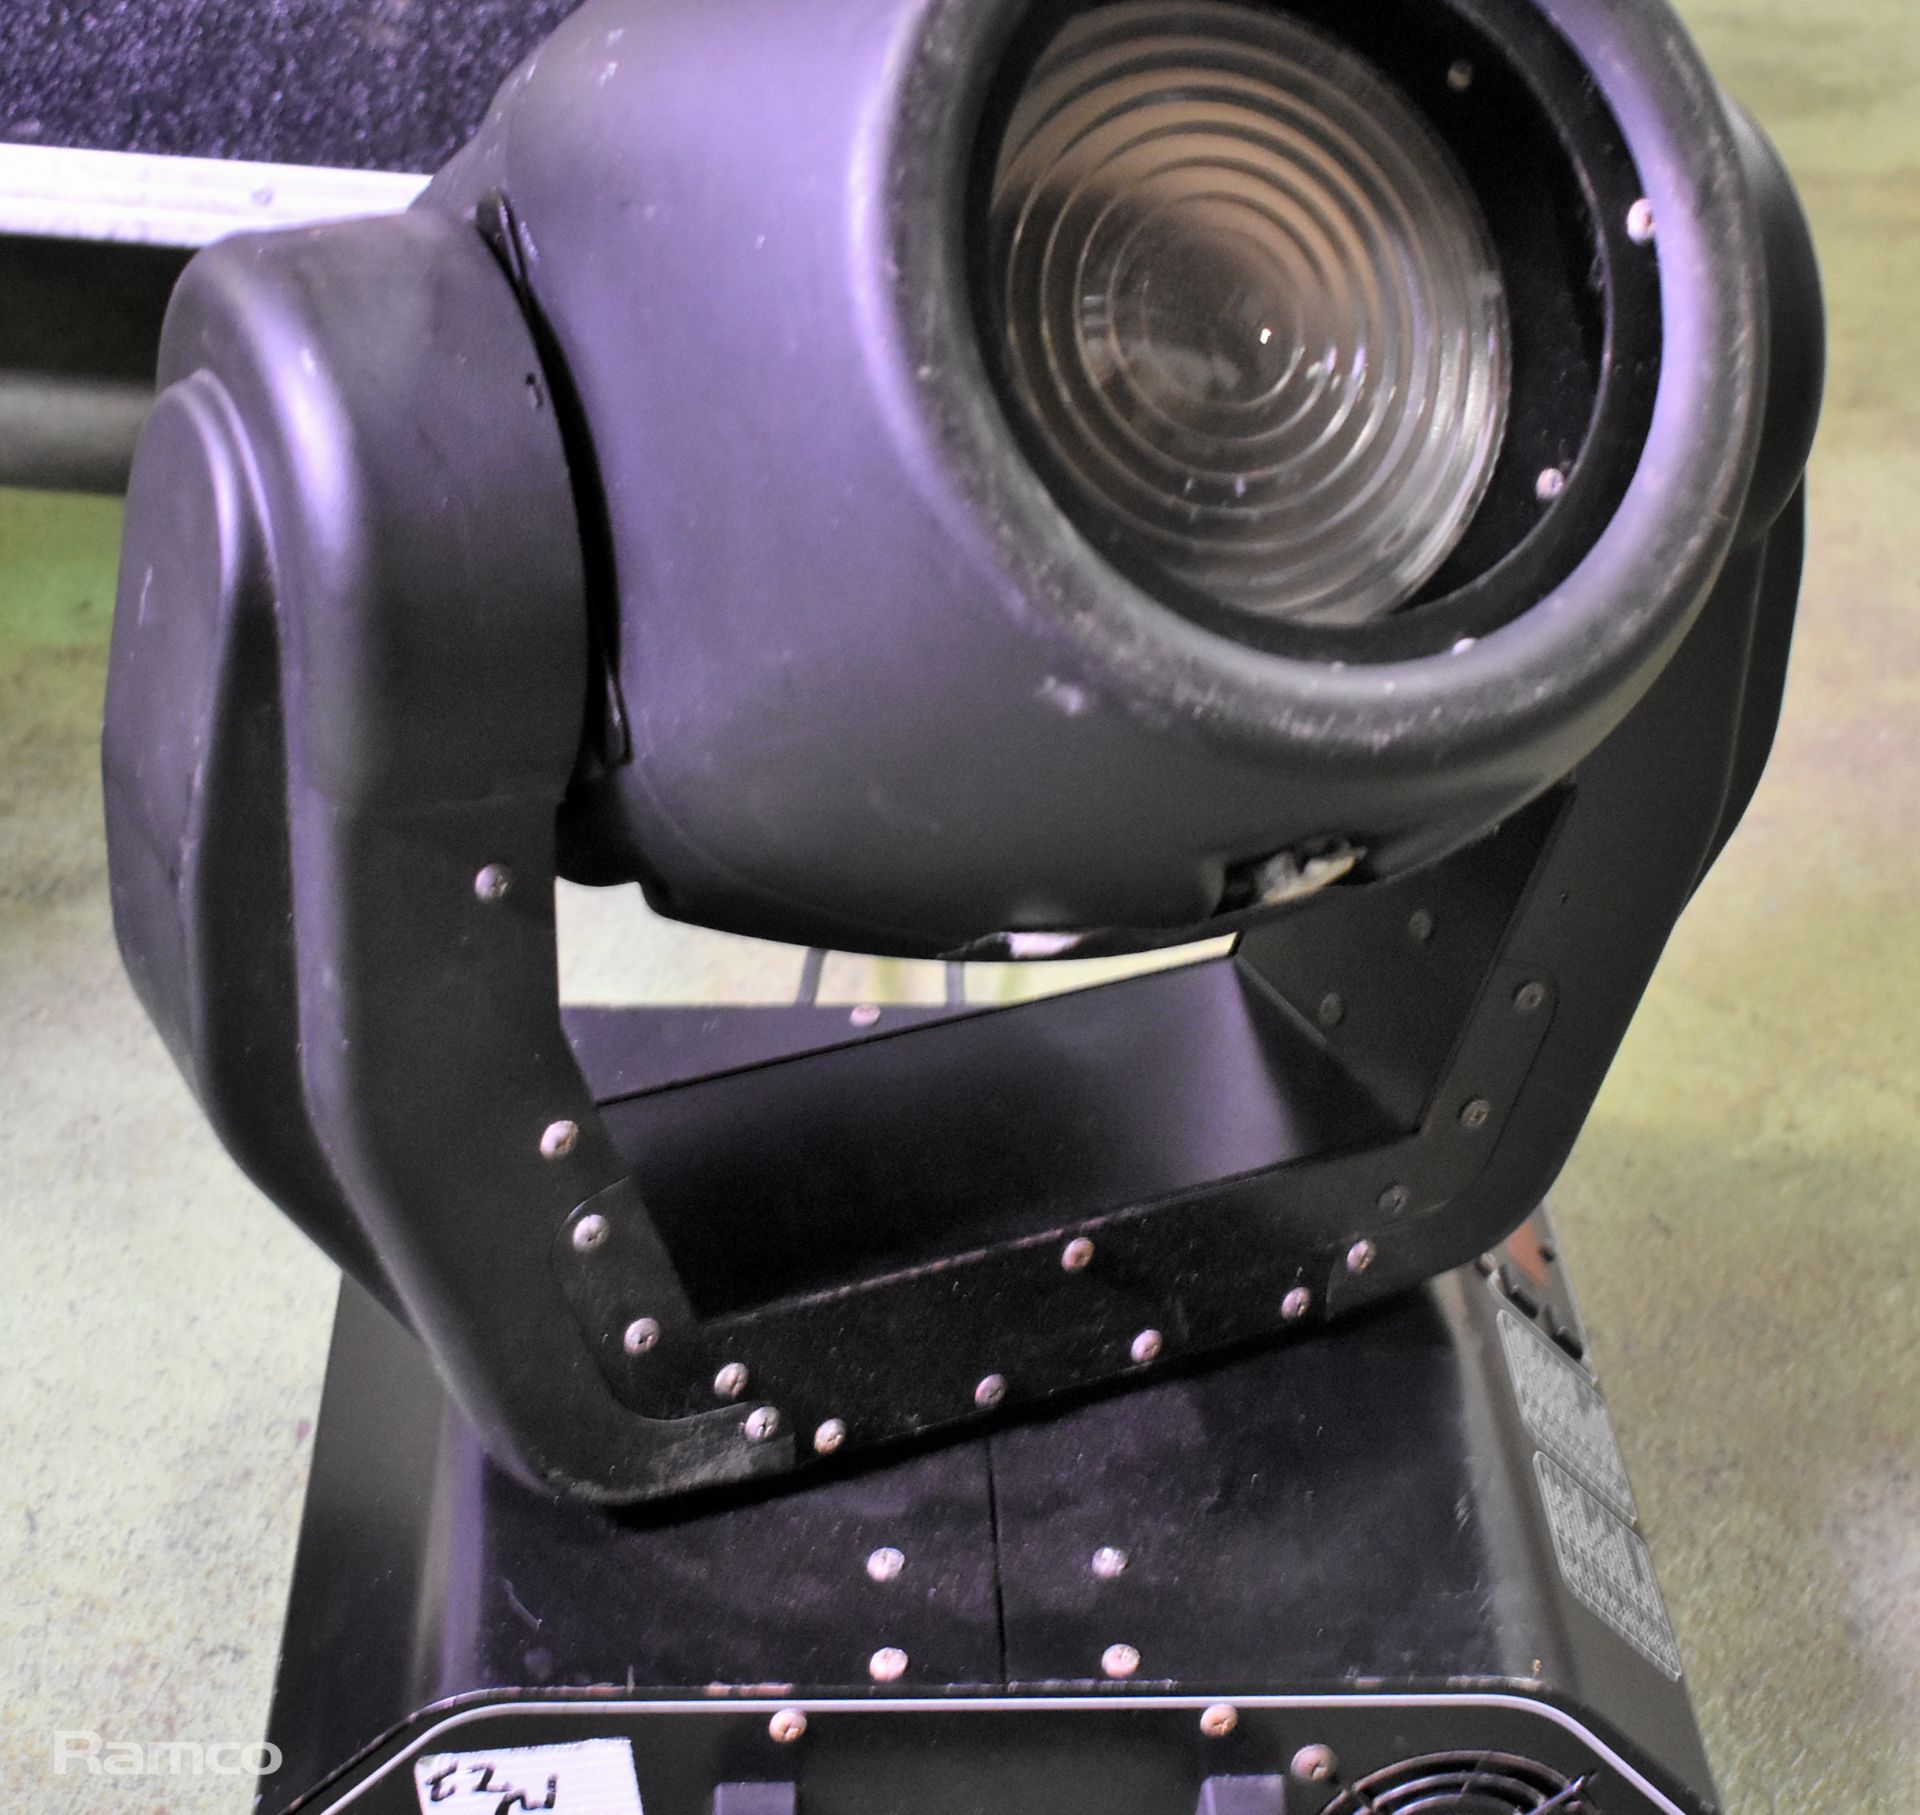 Two moving heads 640 Future light in flight case - L 1100 x W 460 x H 900mm - Image 7 of 13